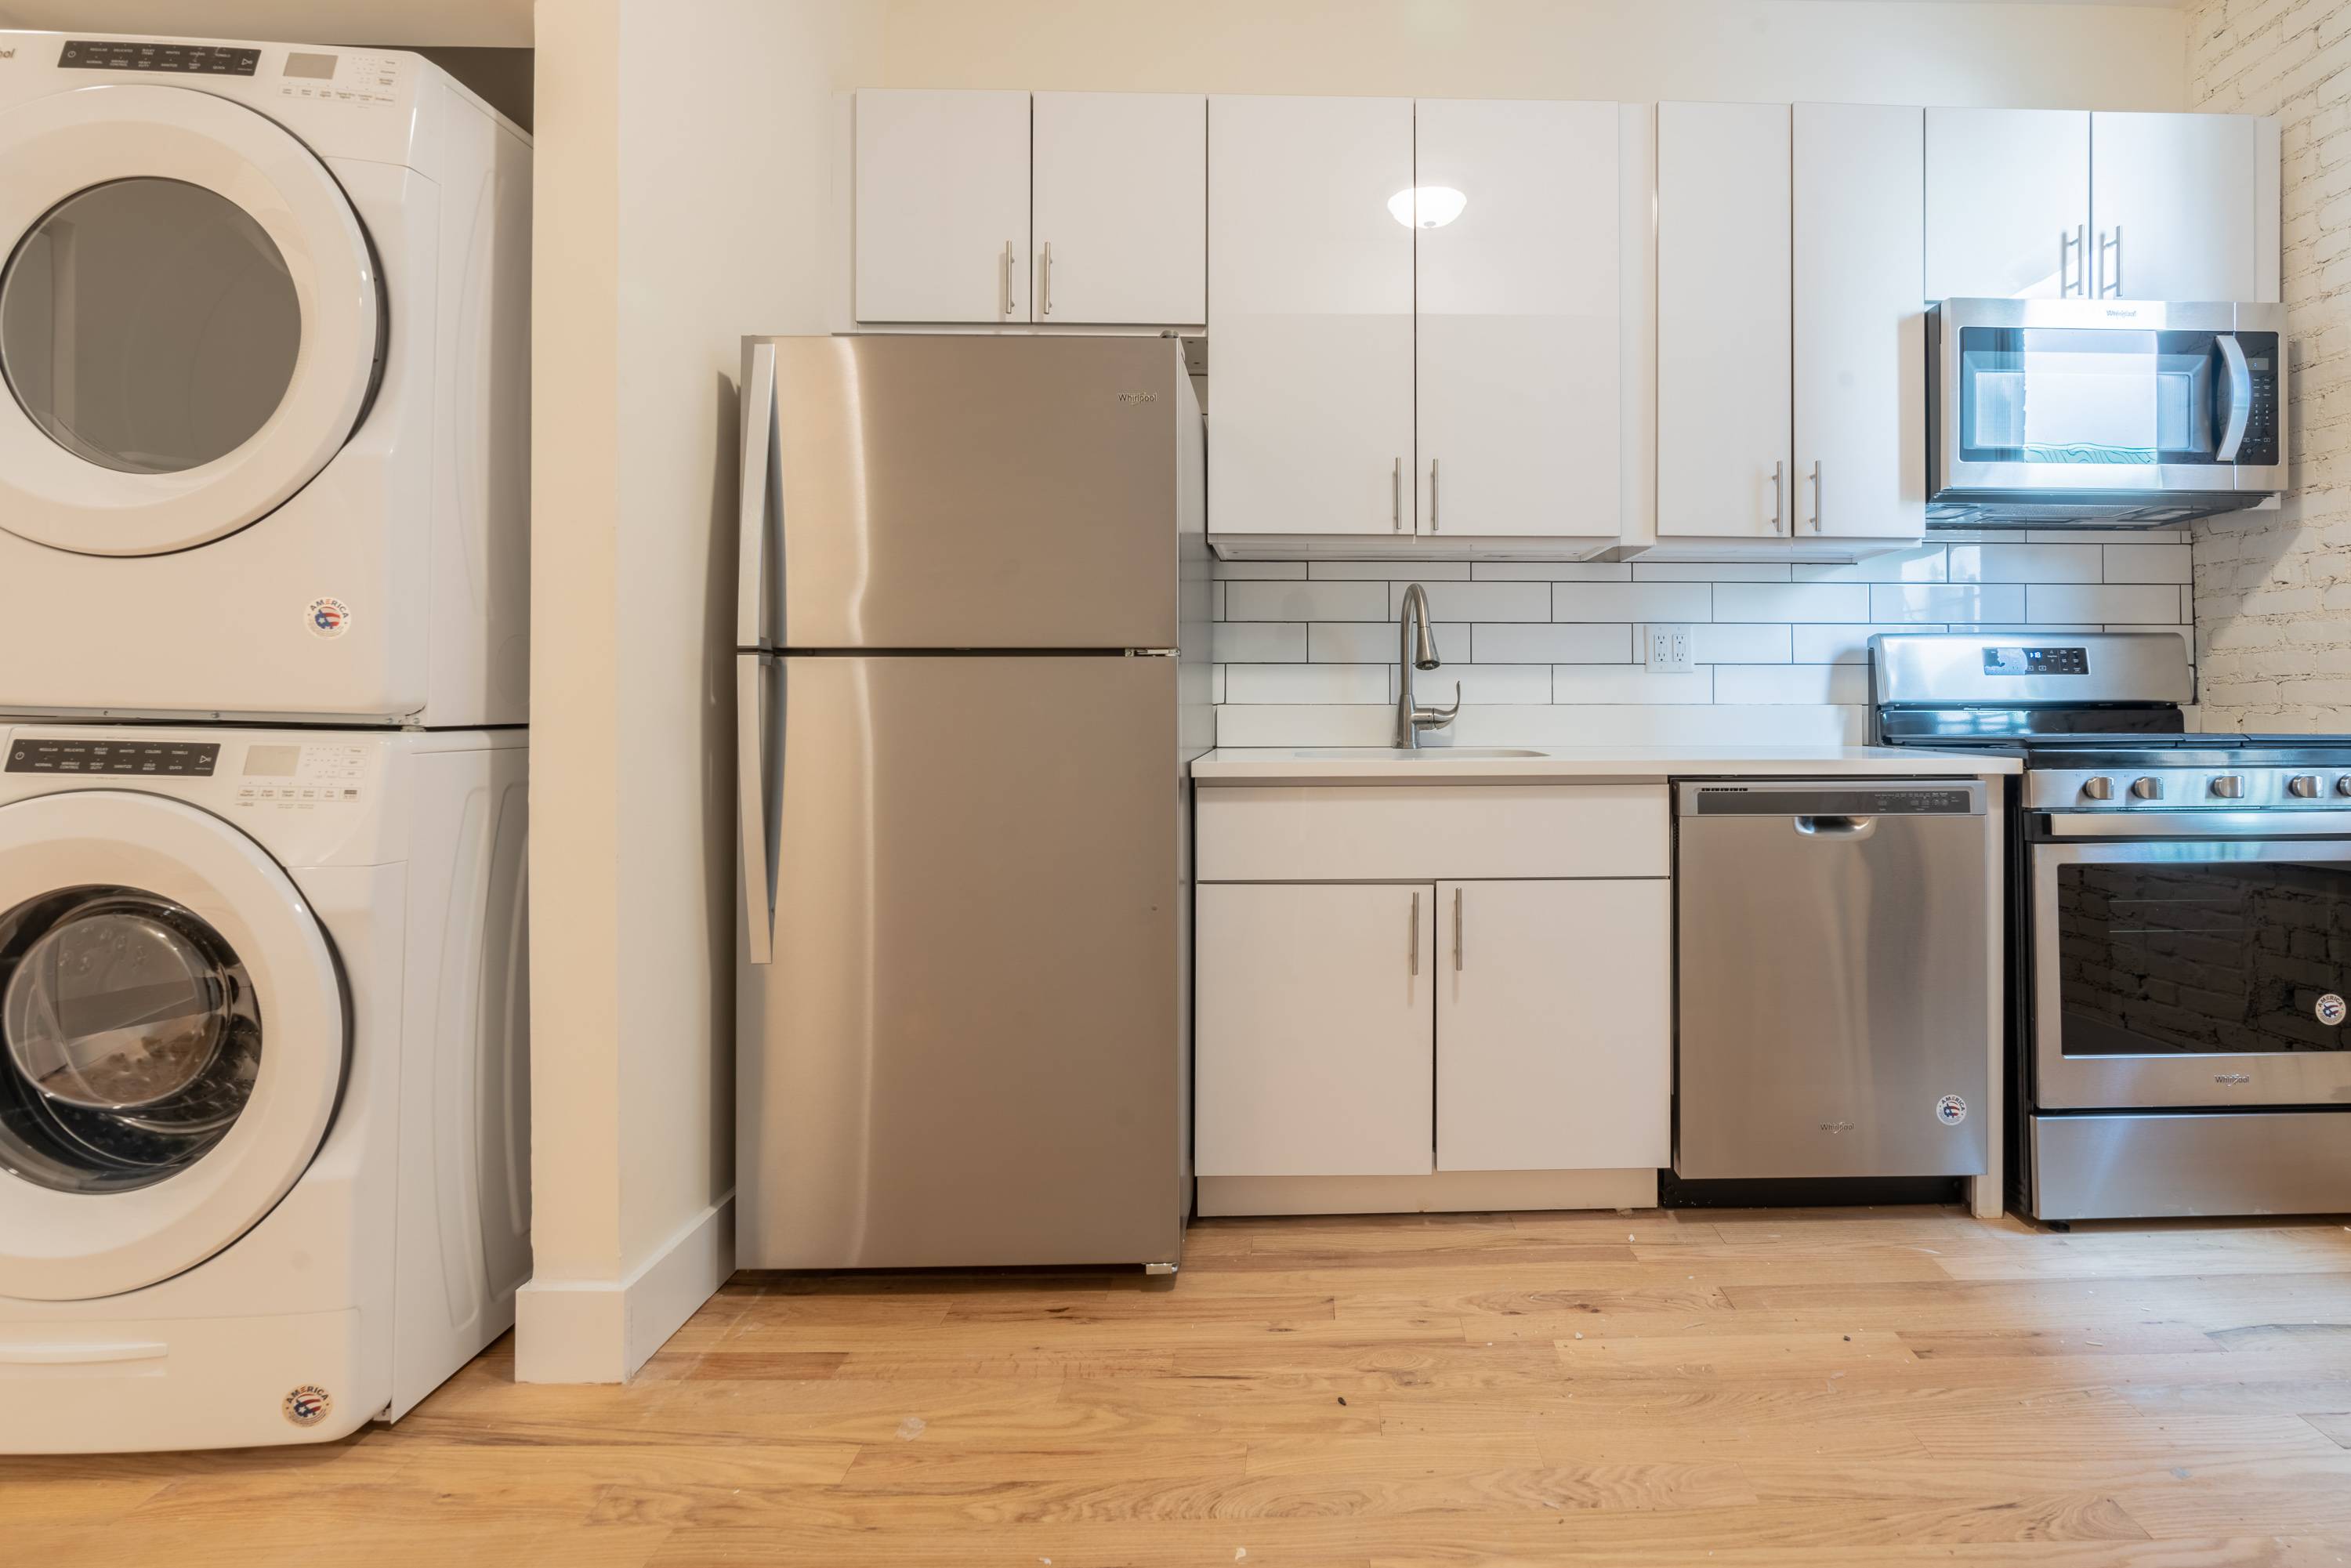 Stunning 2BR Open Layout across the street from Journal Square Path Station! On Site Super, Laundry On Site!